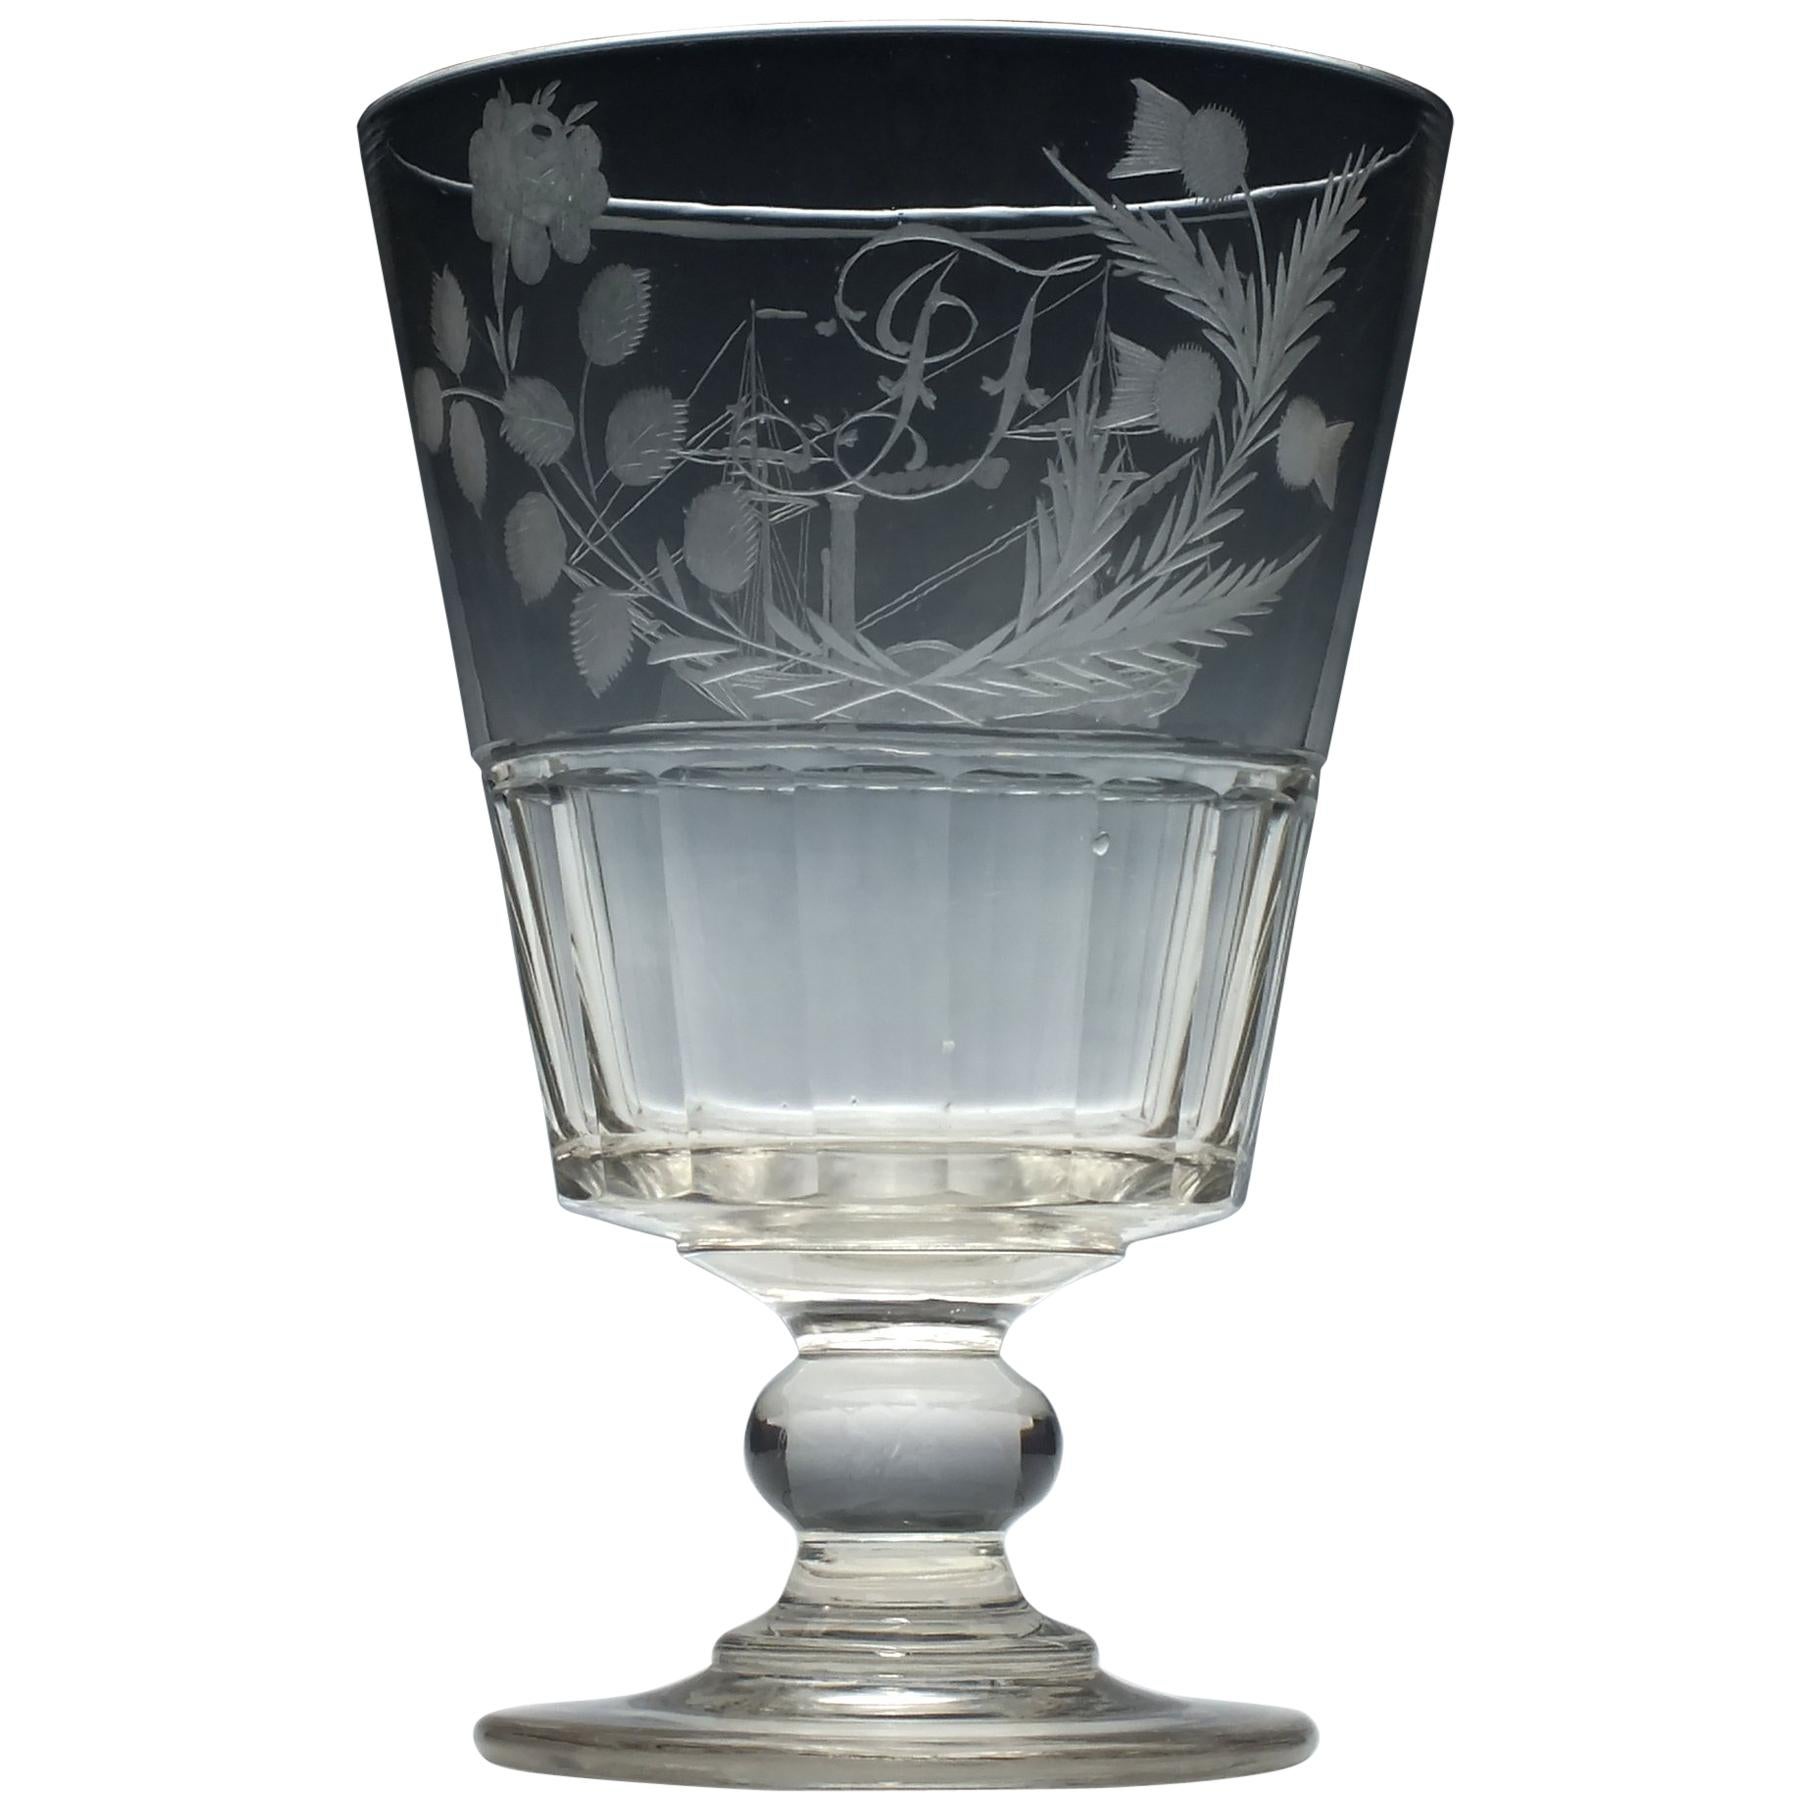 Large 19th Century Glass Serving Rummer Engraved with Paddle Steamer, circa 1830 For Sale